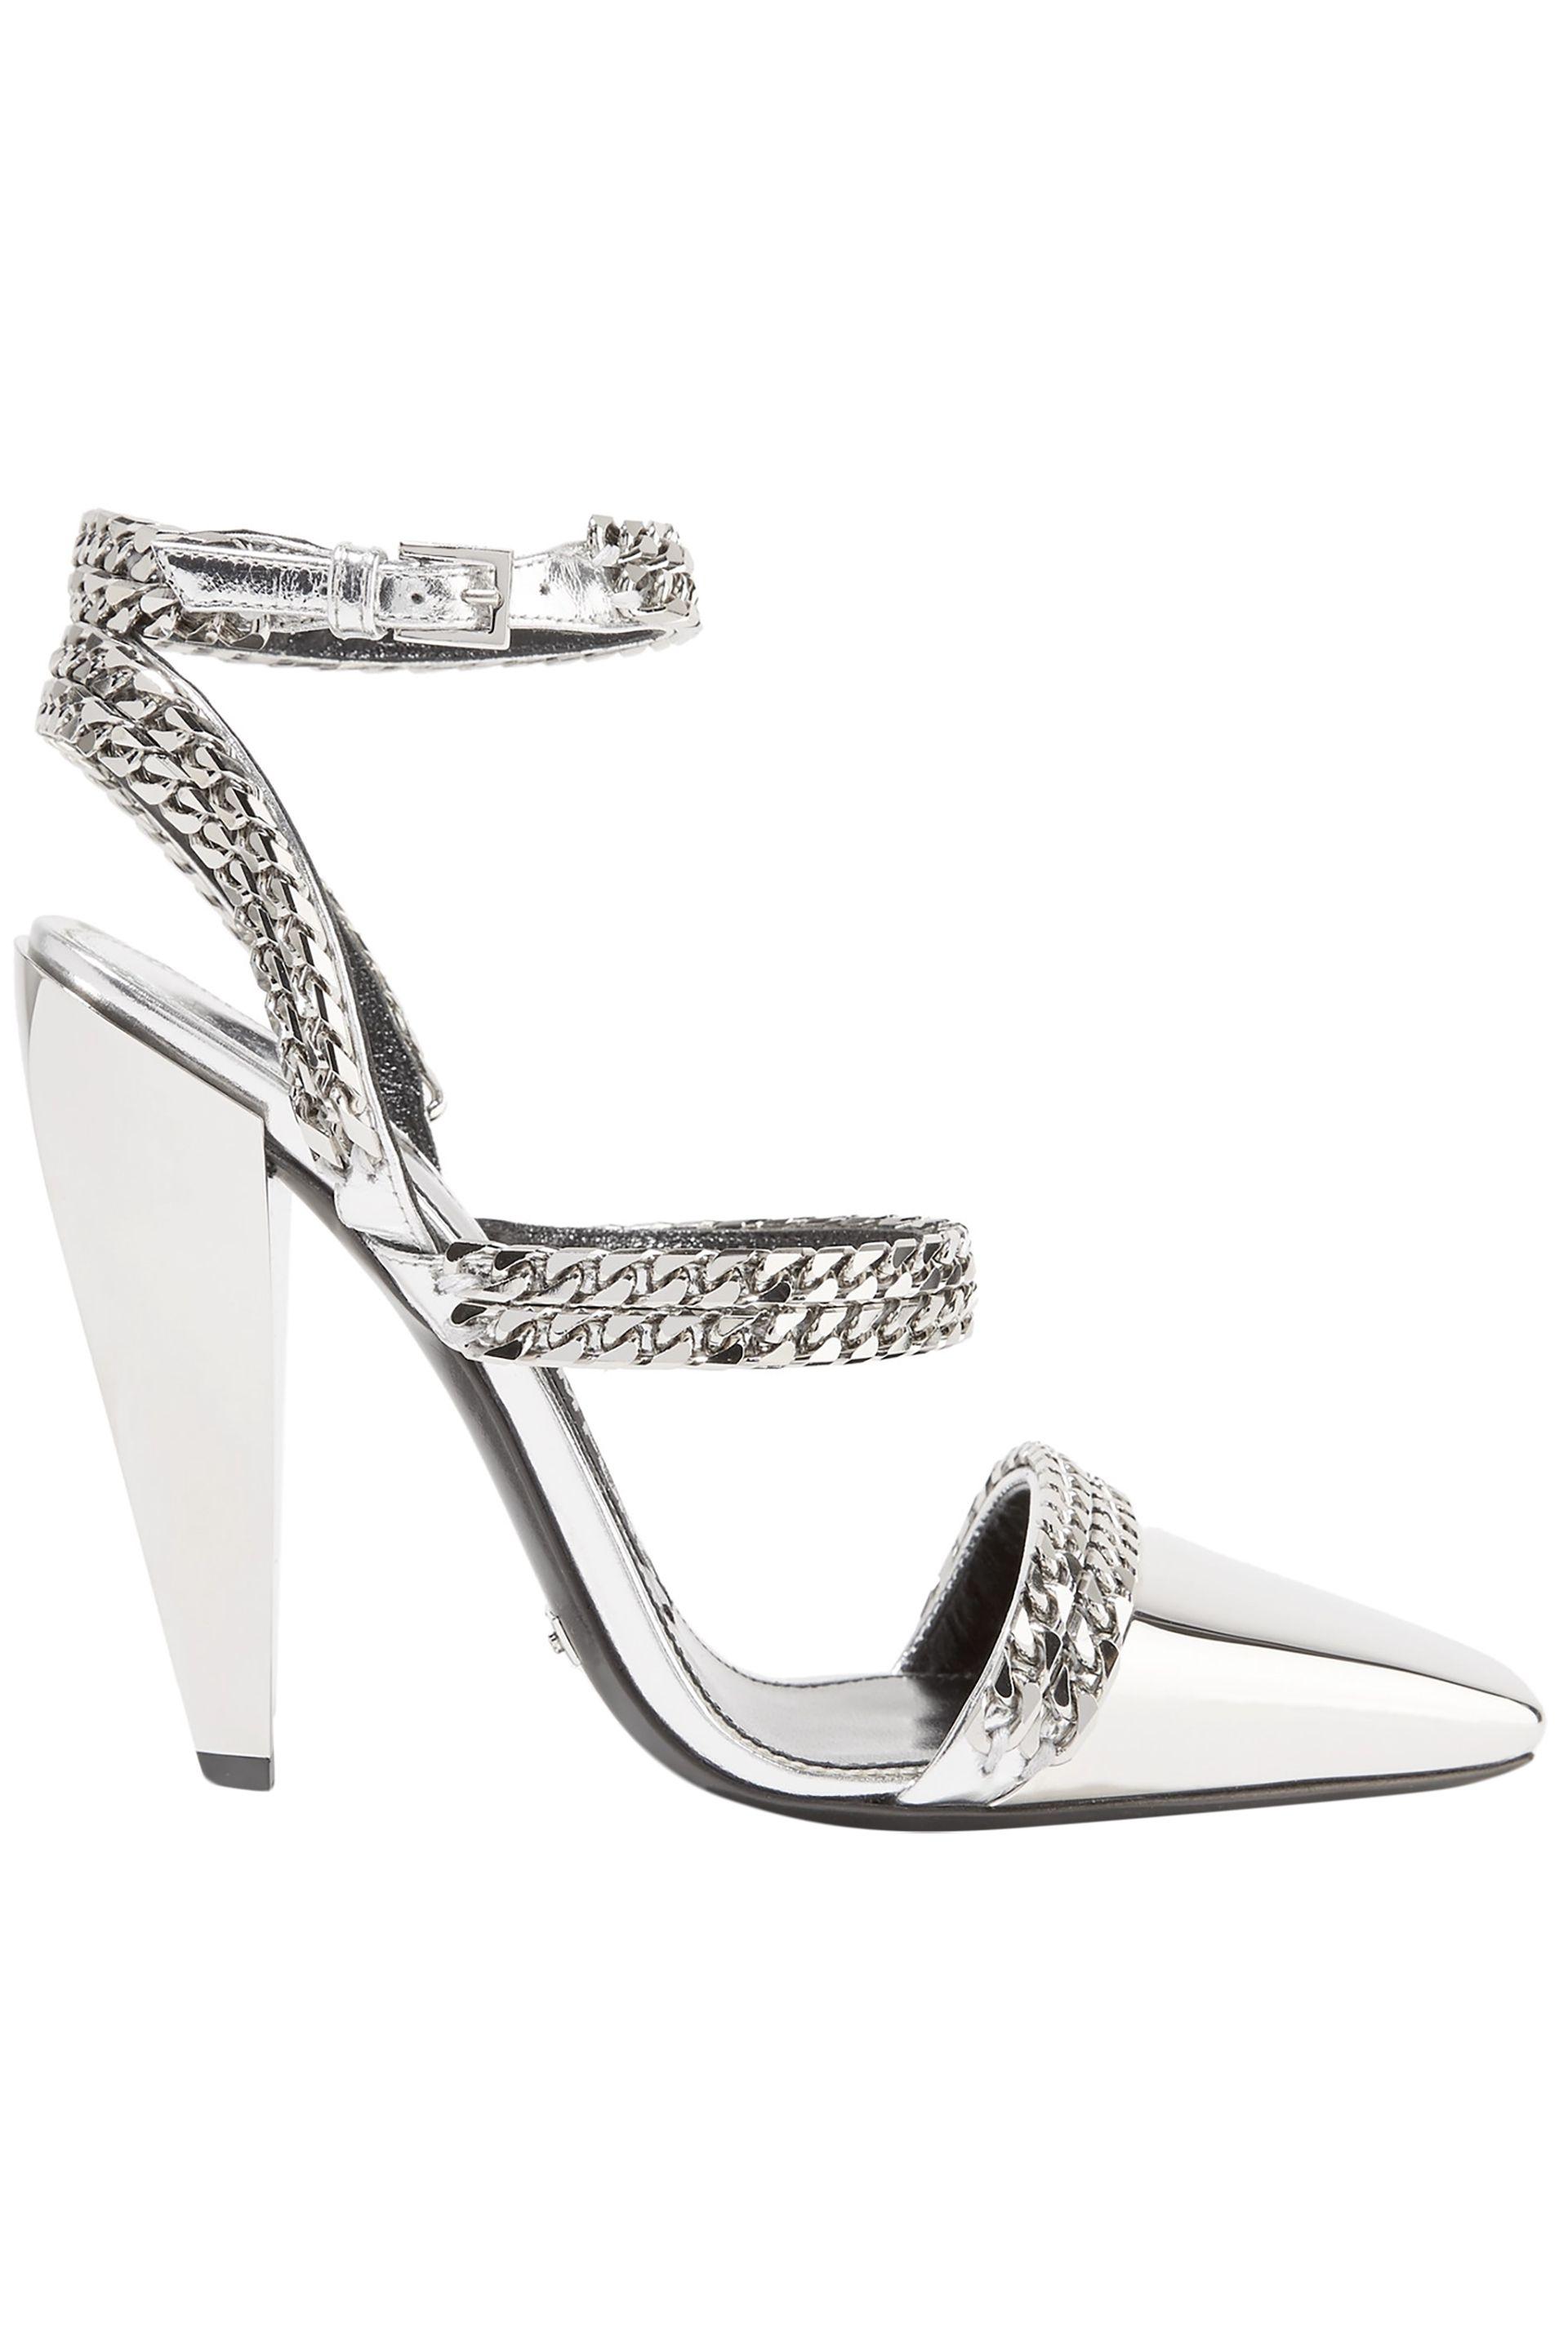 Tom Ford Chain-embellished Mirrored-leather Pumps Silver in Metallic | Lyst  Australia